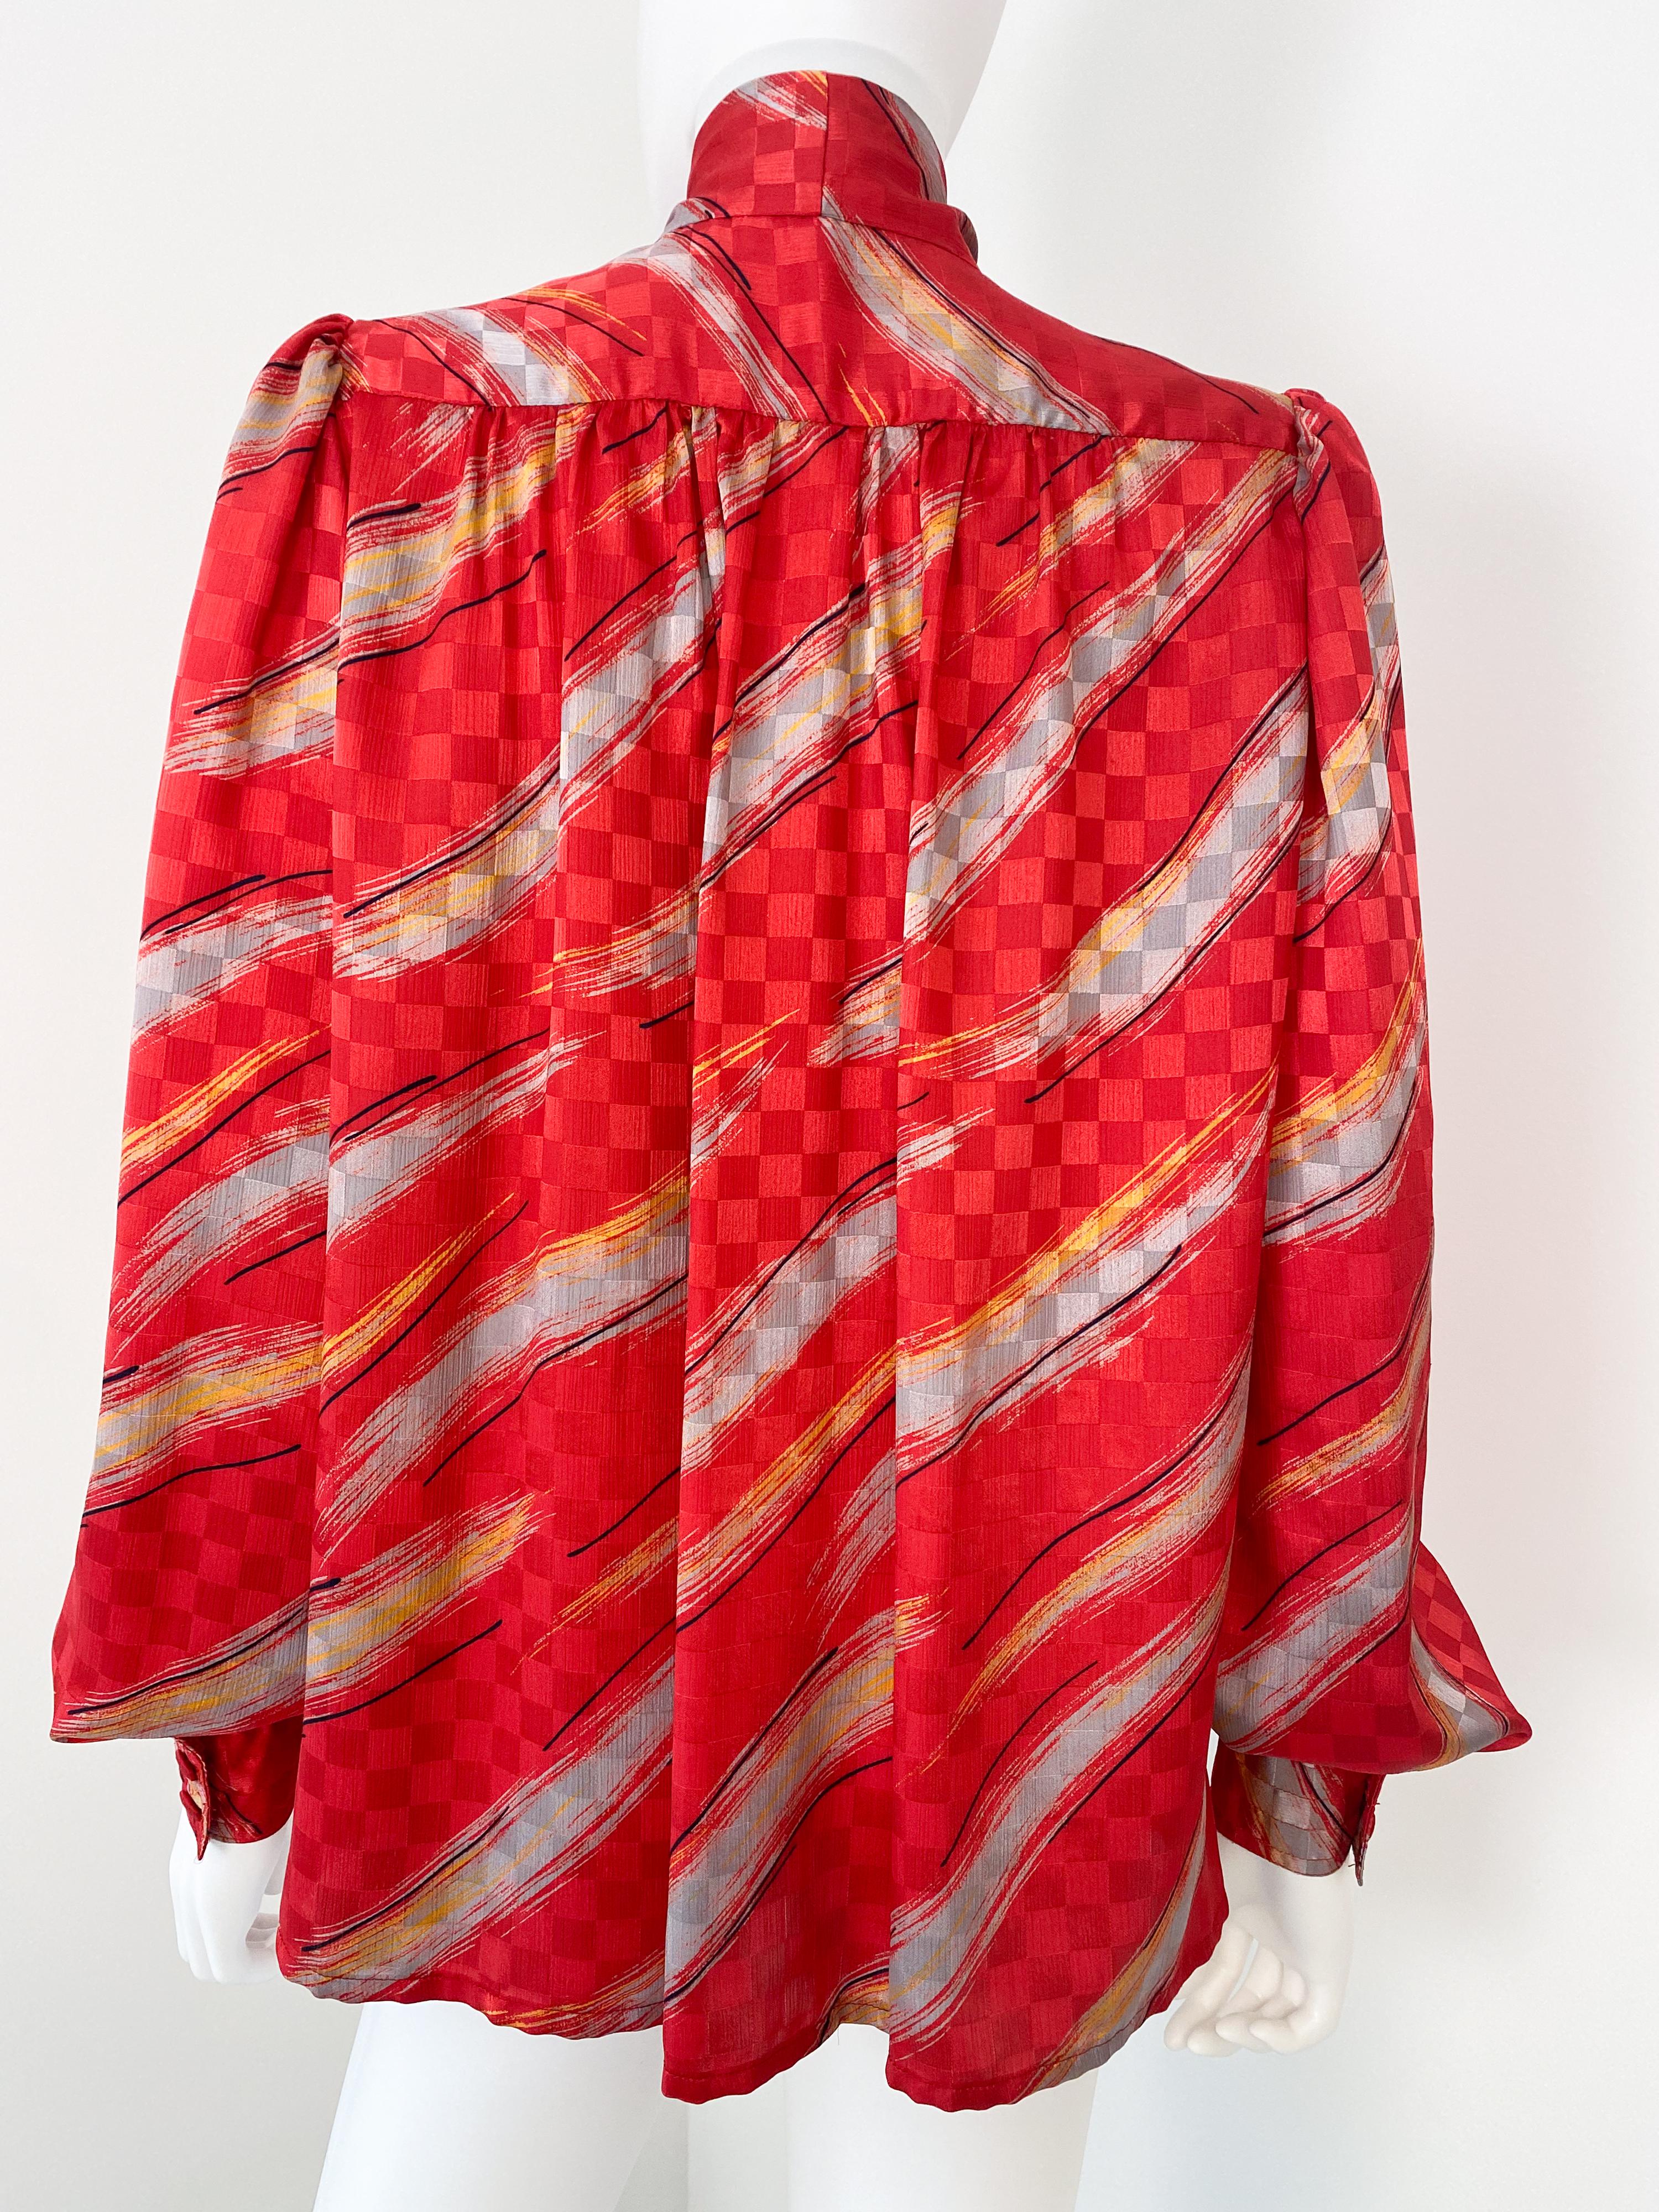 Vintage 1980s Silky Polyester Blouse Top Red and Gray Slashes Size 10/12 For Sale 6